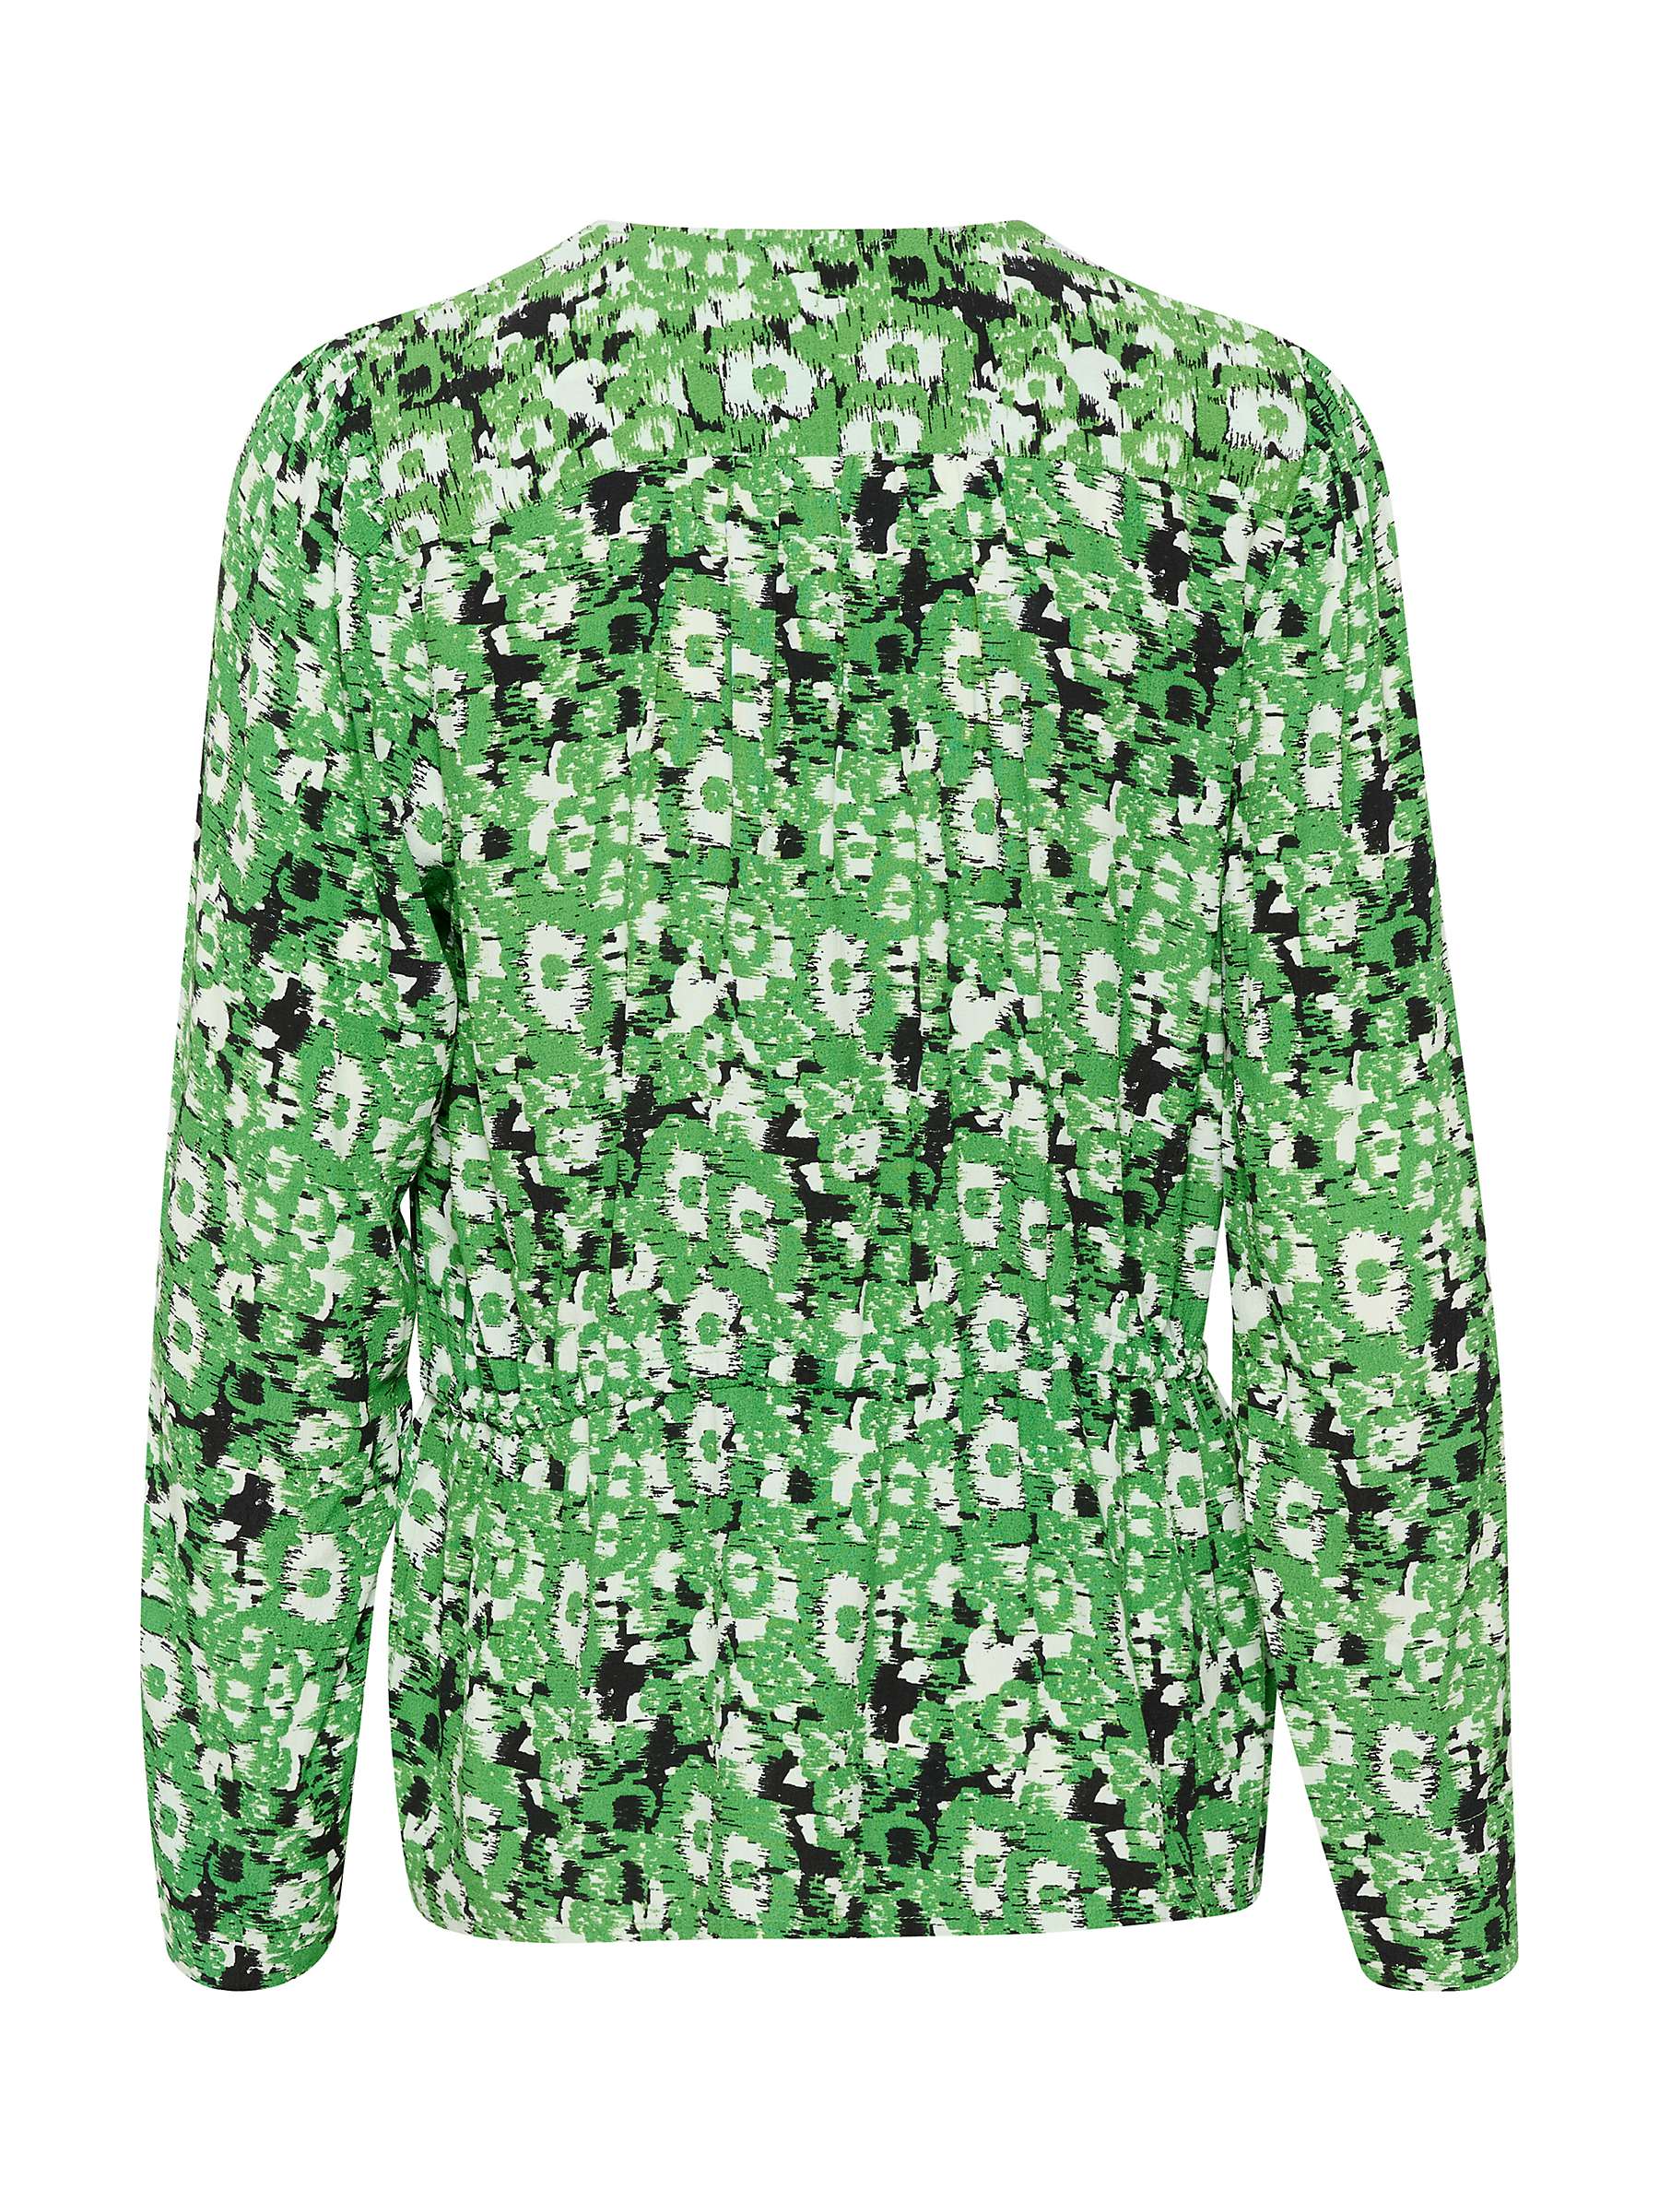 Buy Soaked In Luxury Ina Wrap Blouse, Medium Green Cloud Online at johnlewis.com